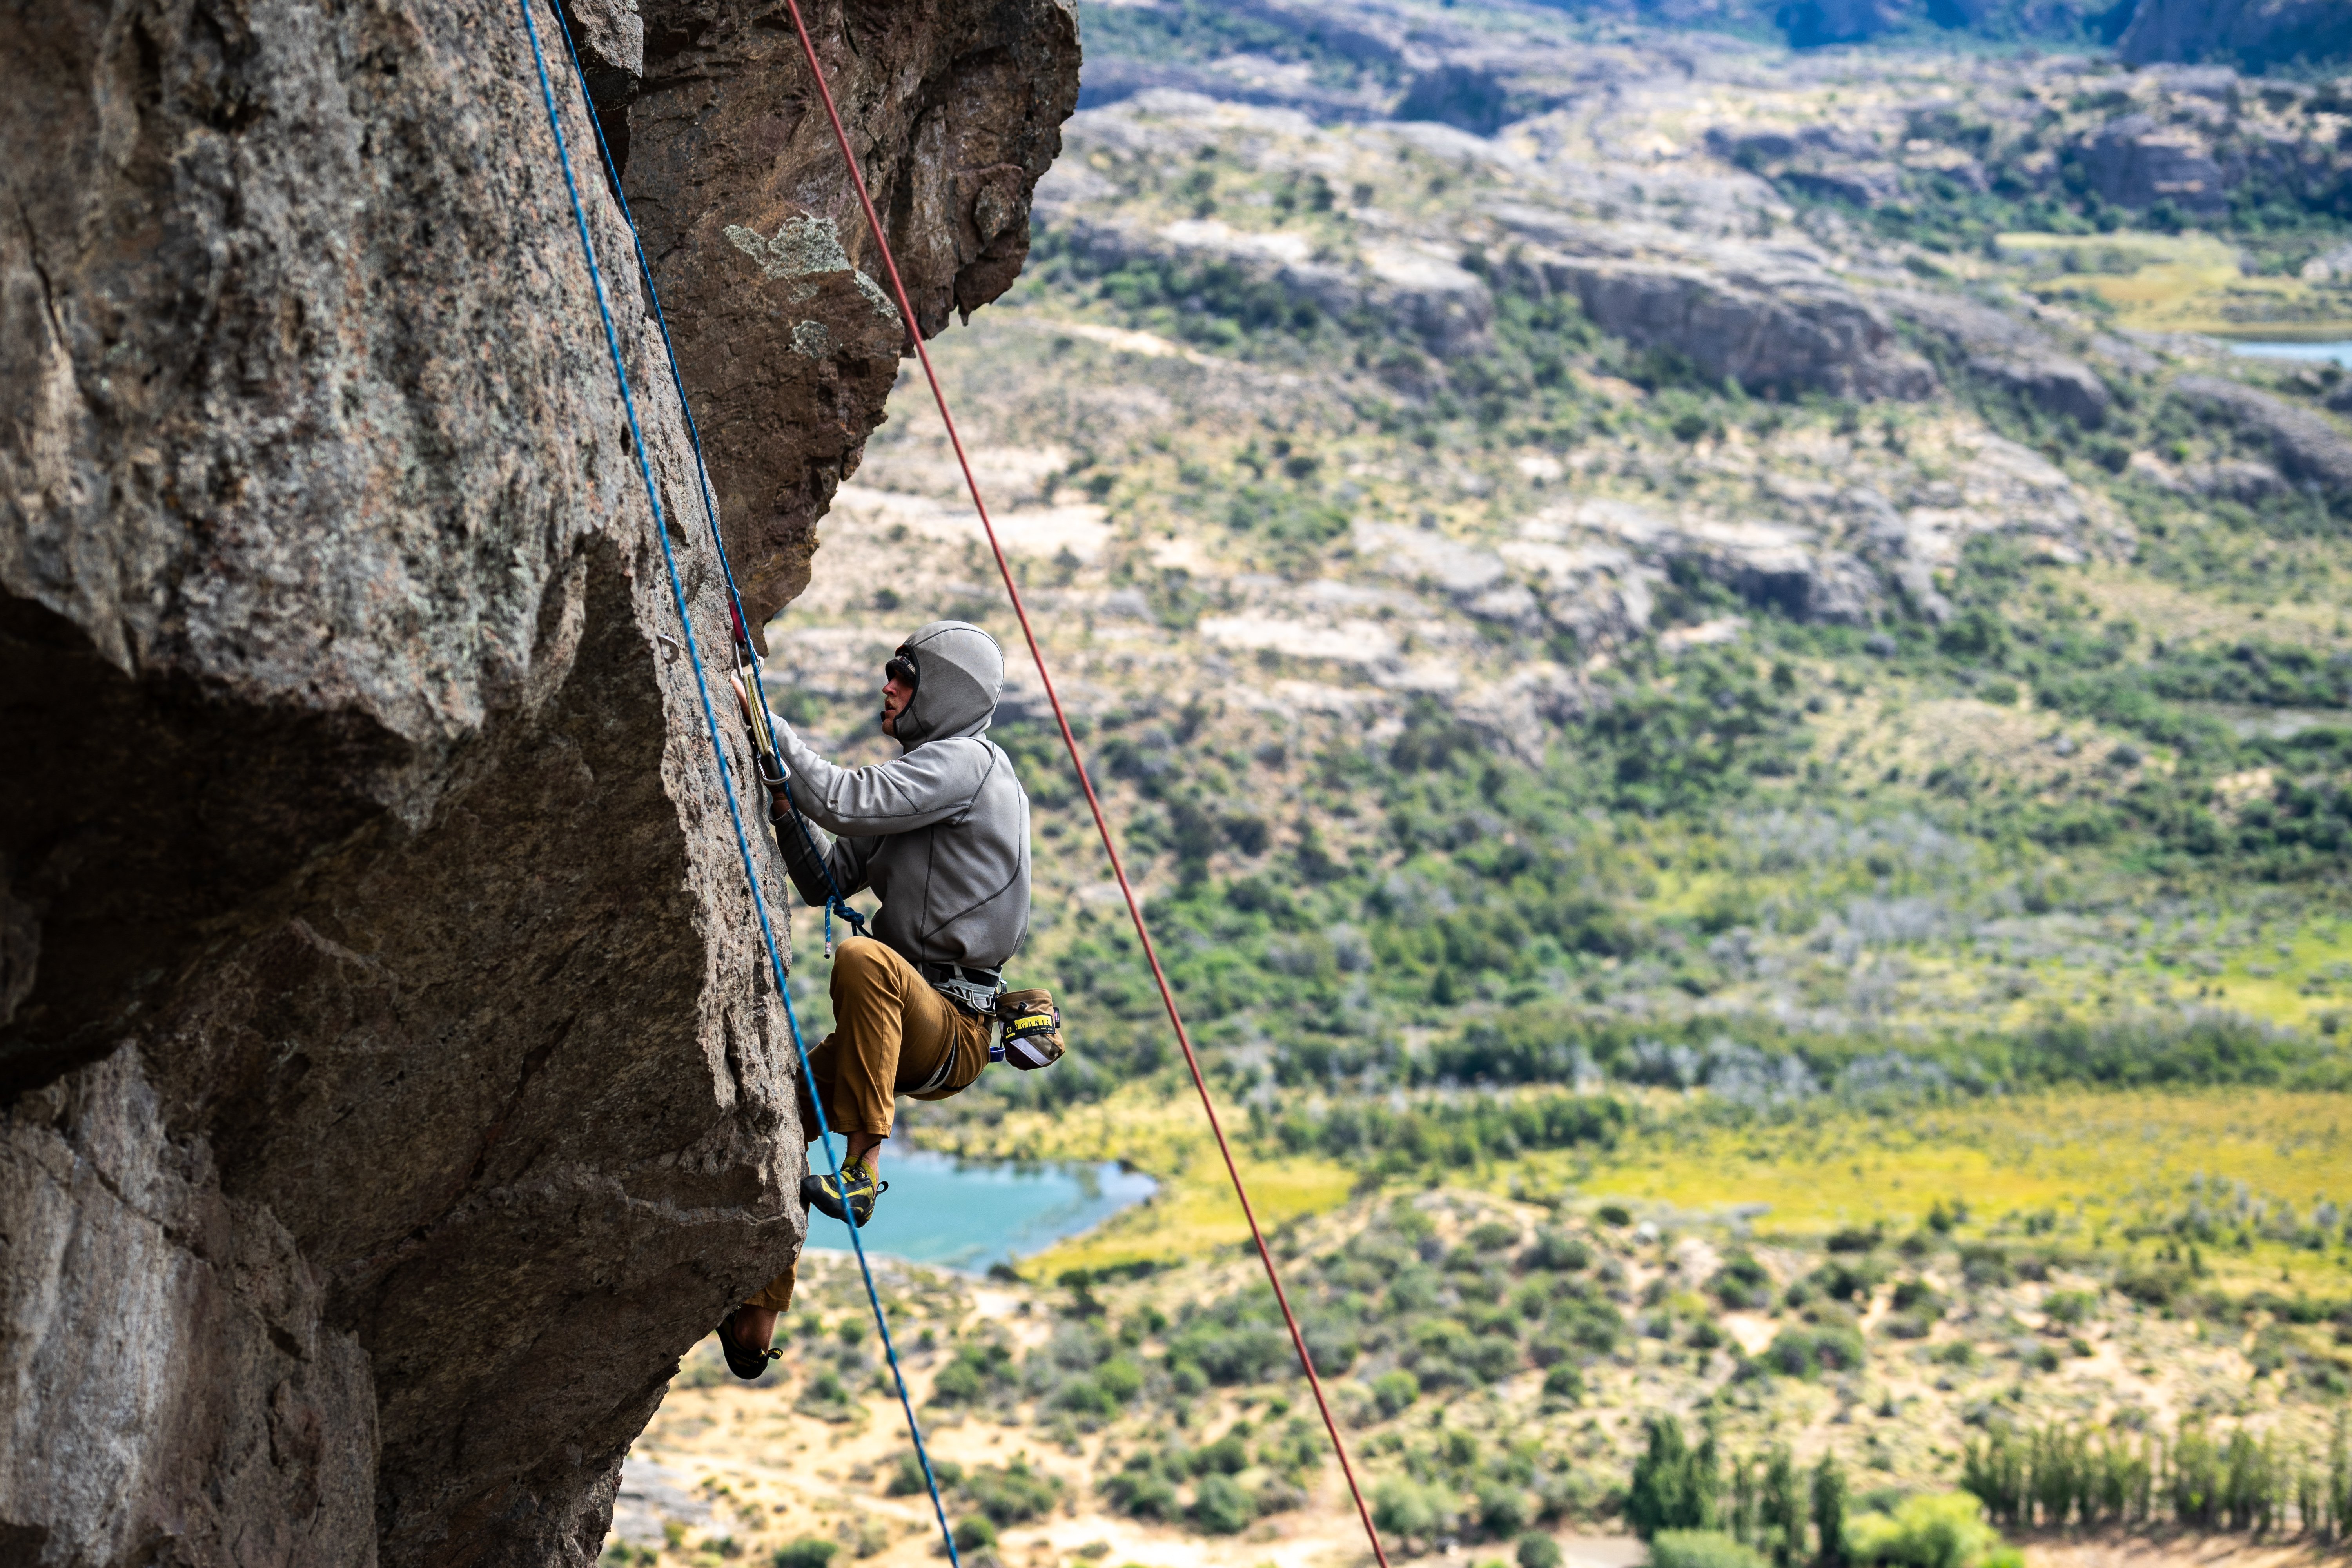 rock climber on a rock face high above a blue lake and lush valley in the mountains